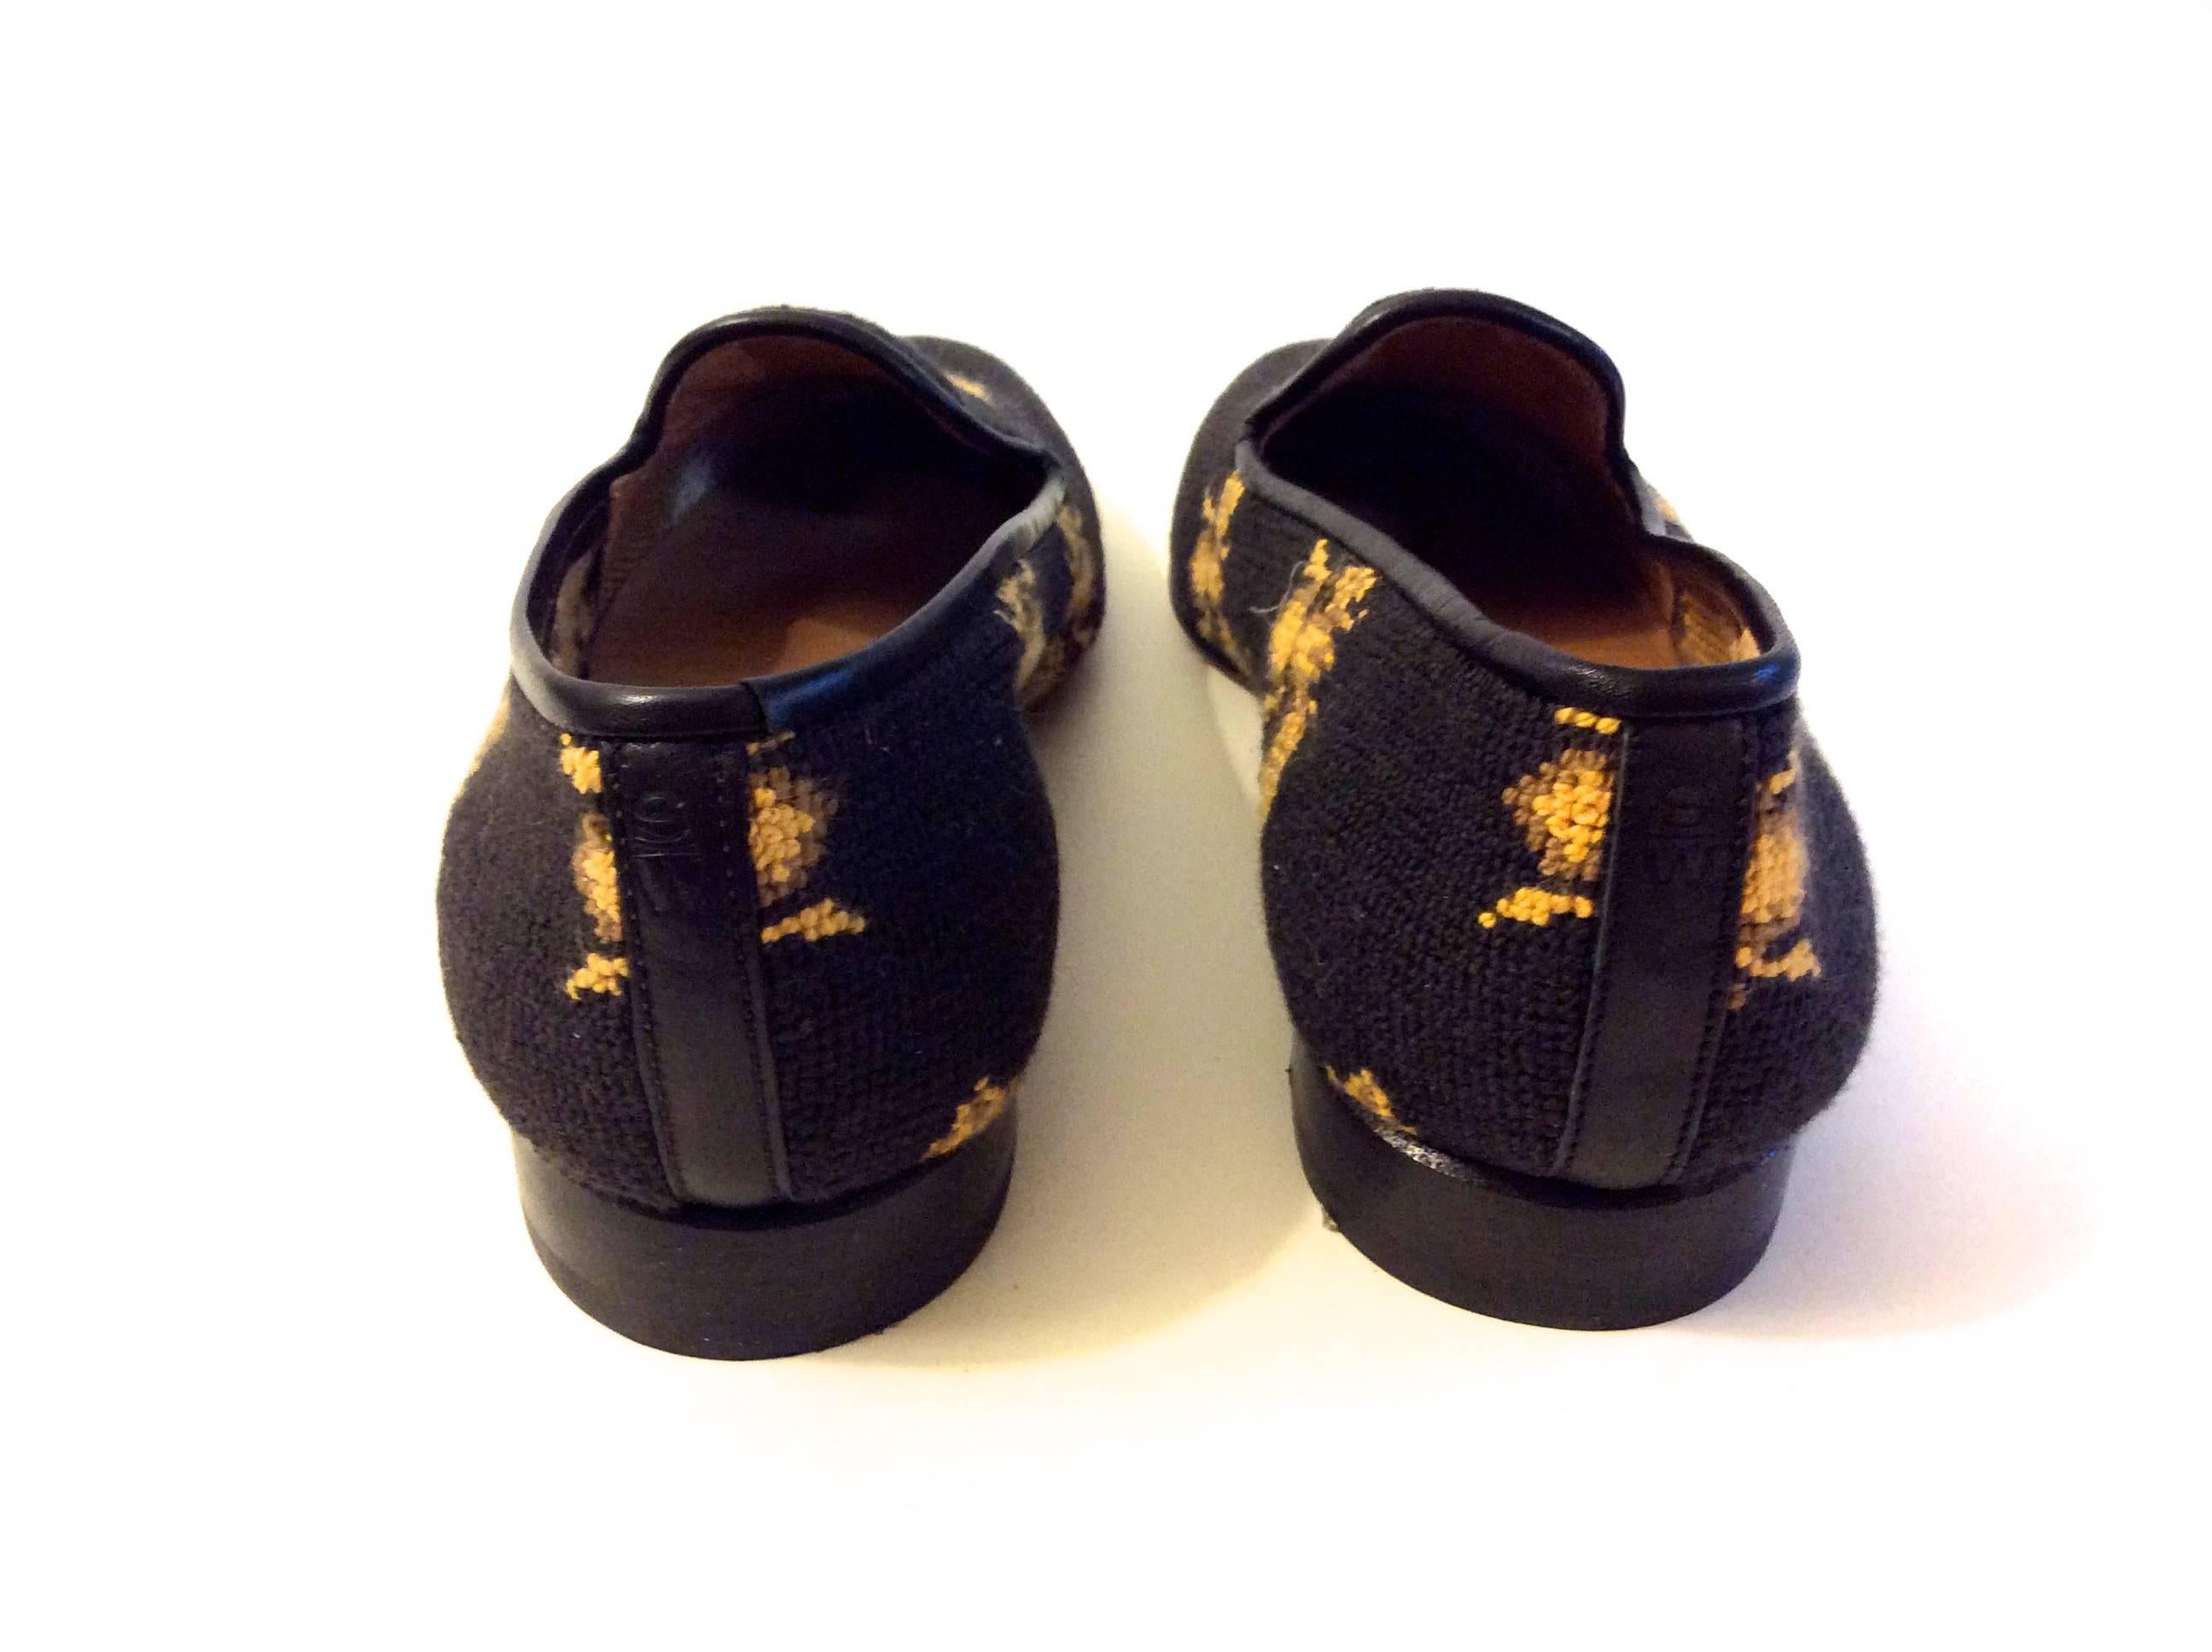 This new pair of Stubbs and Wooton of Palm Beach shoes is a size 7.5. They are made in Spain and are a needlepoint stitching throughout the body of the shoe. The sole is made of leather. There is a golden image of a bud sewn throughout the body of